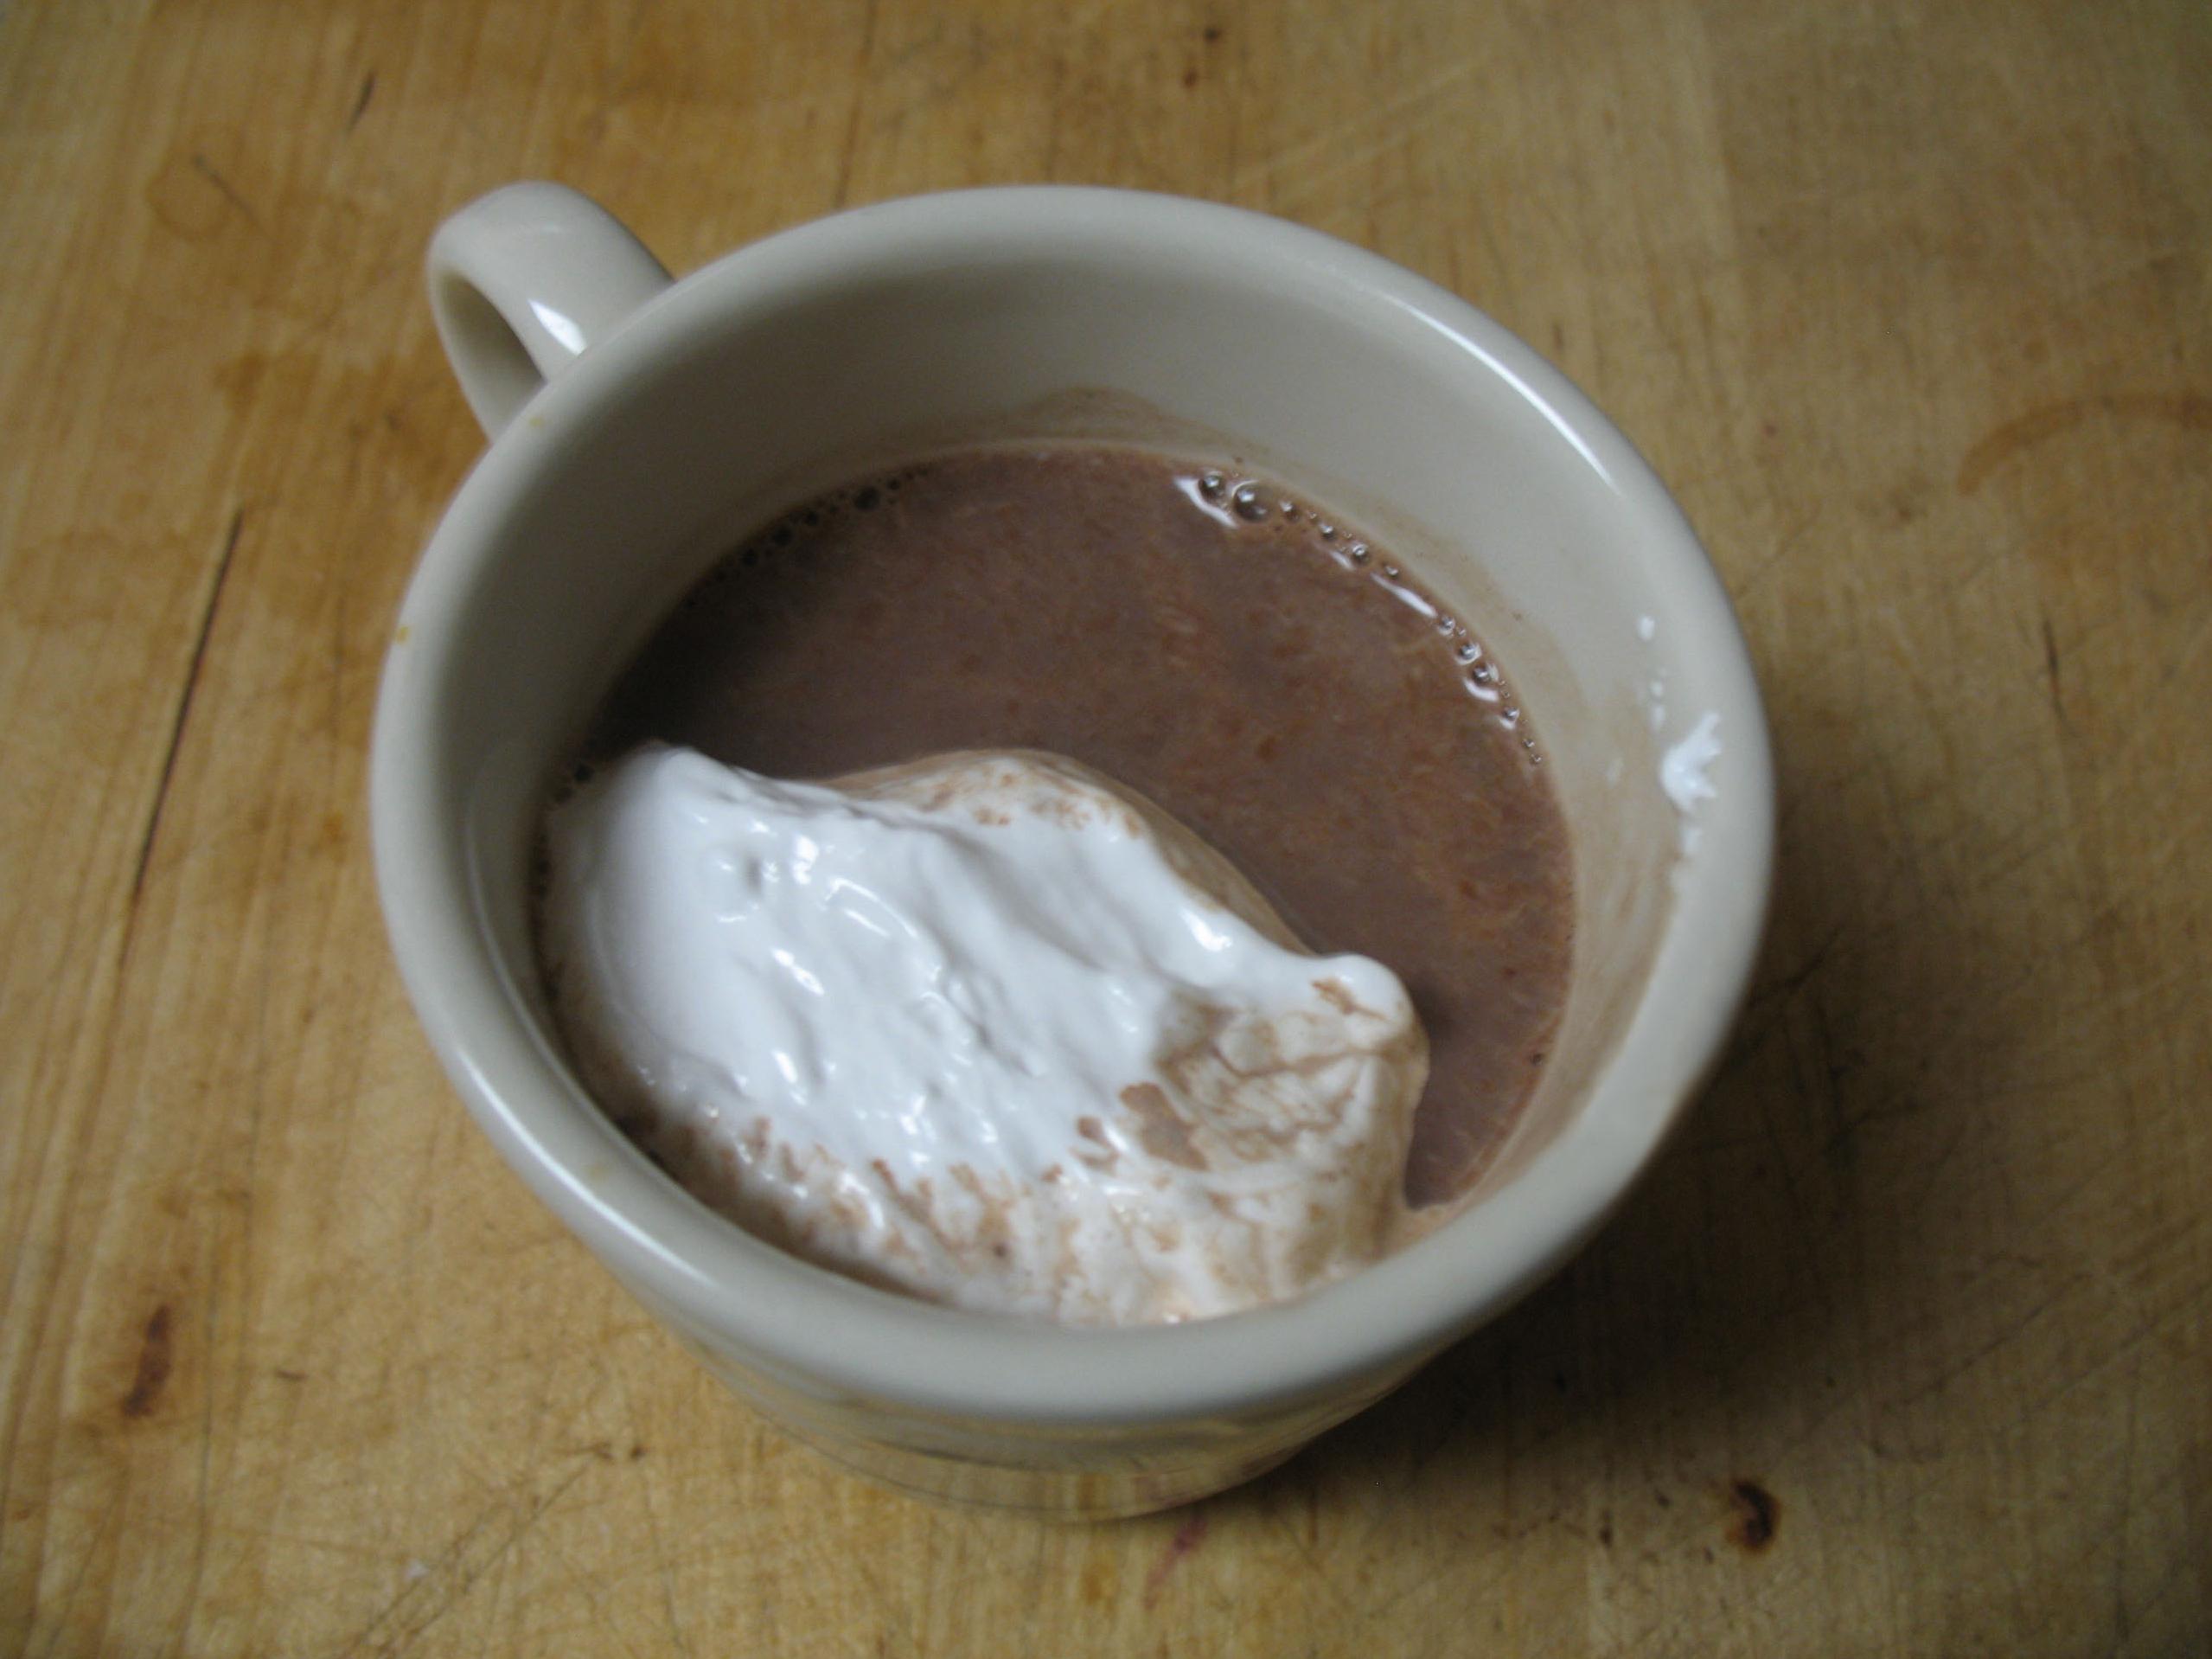  Satisfy your cravings one sip at a time with our Mocha Cocoa recipe!